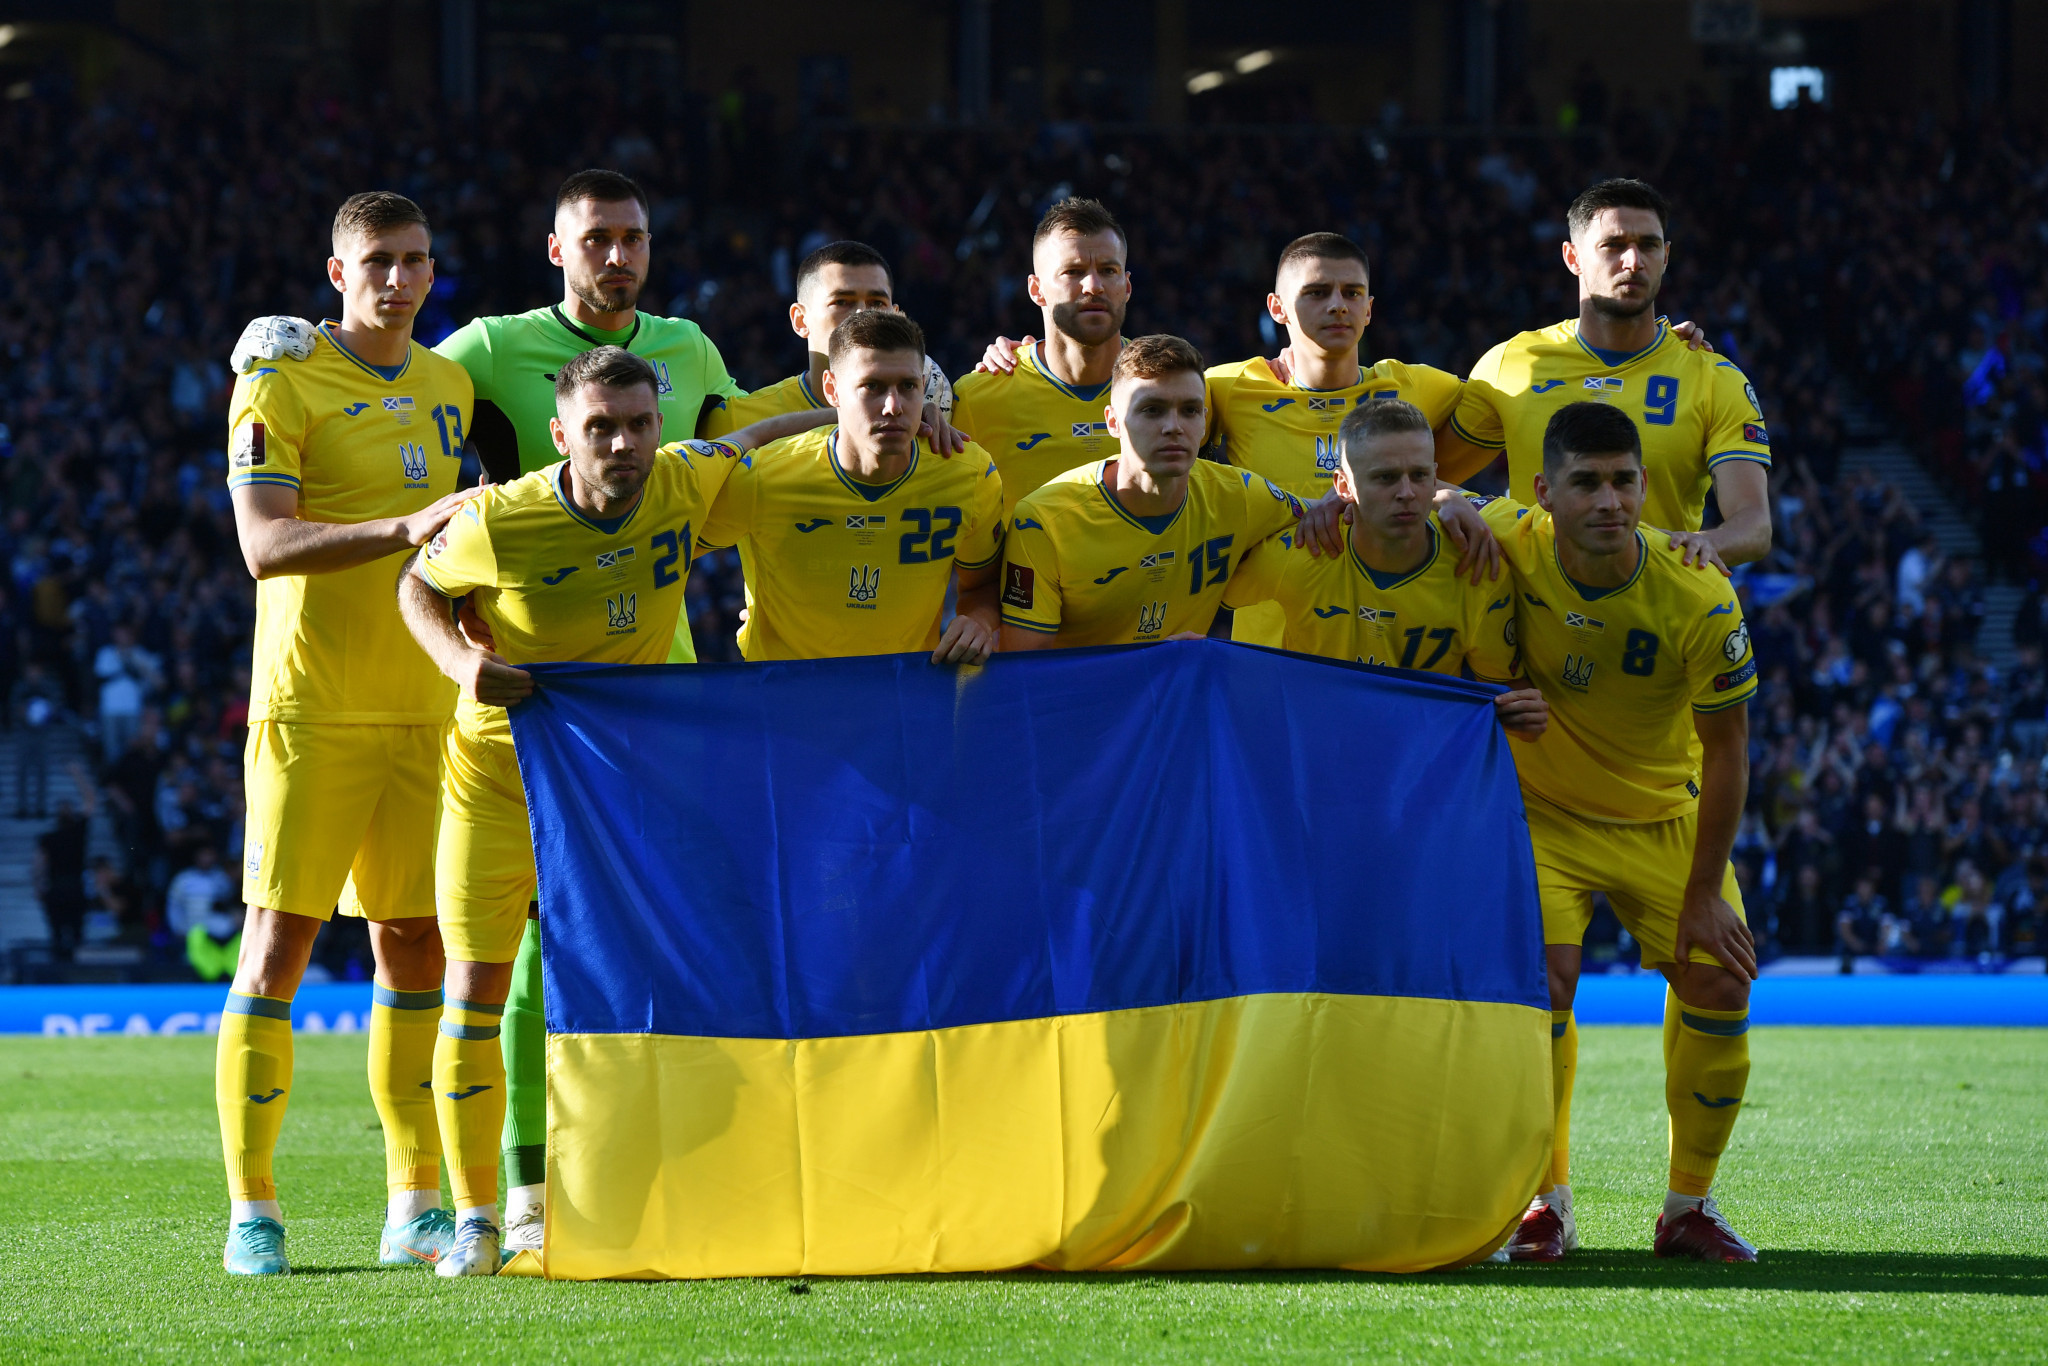 Ukraine's men's national team have moved within one match of qualifying for the FIFA World Cup in Qatar ©Getty Images